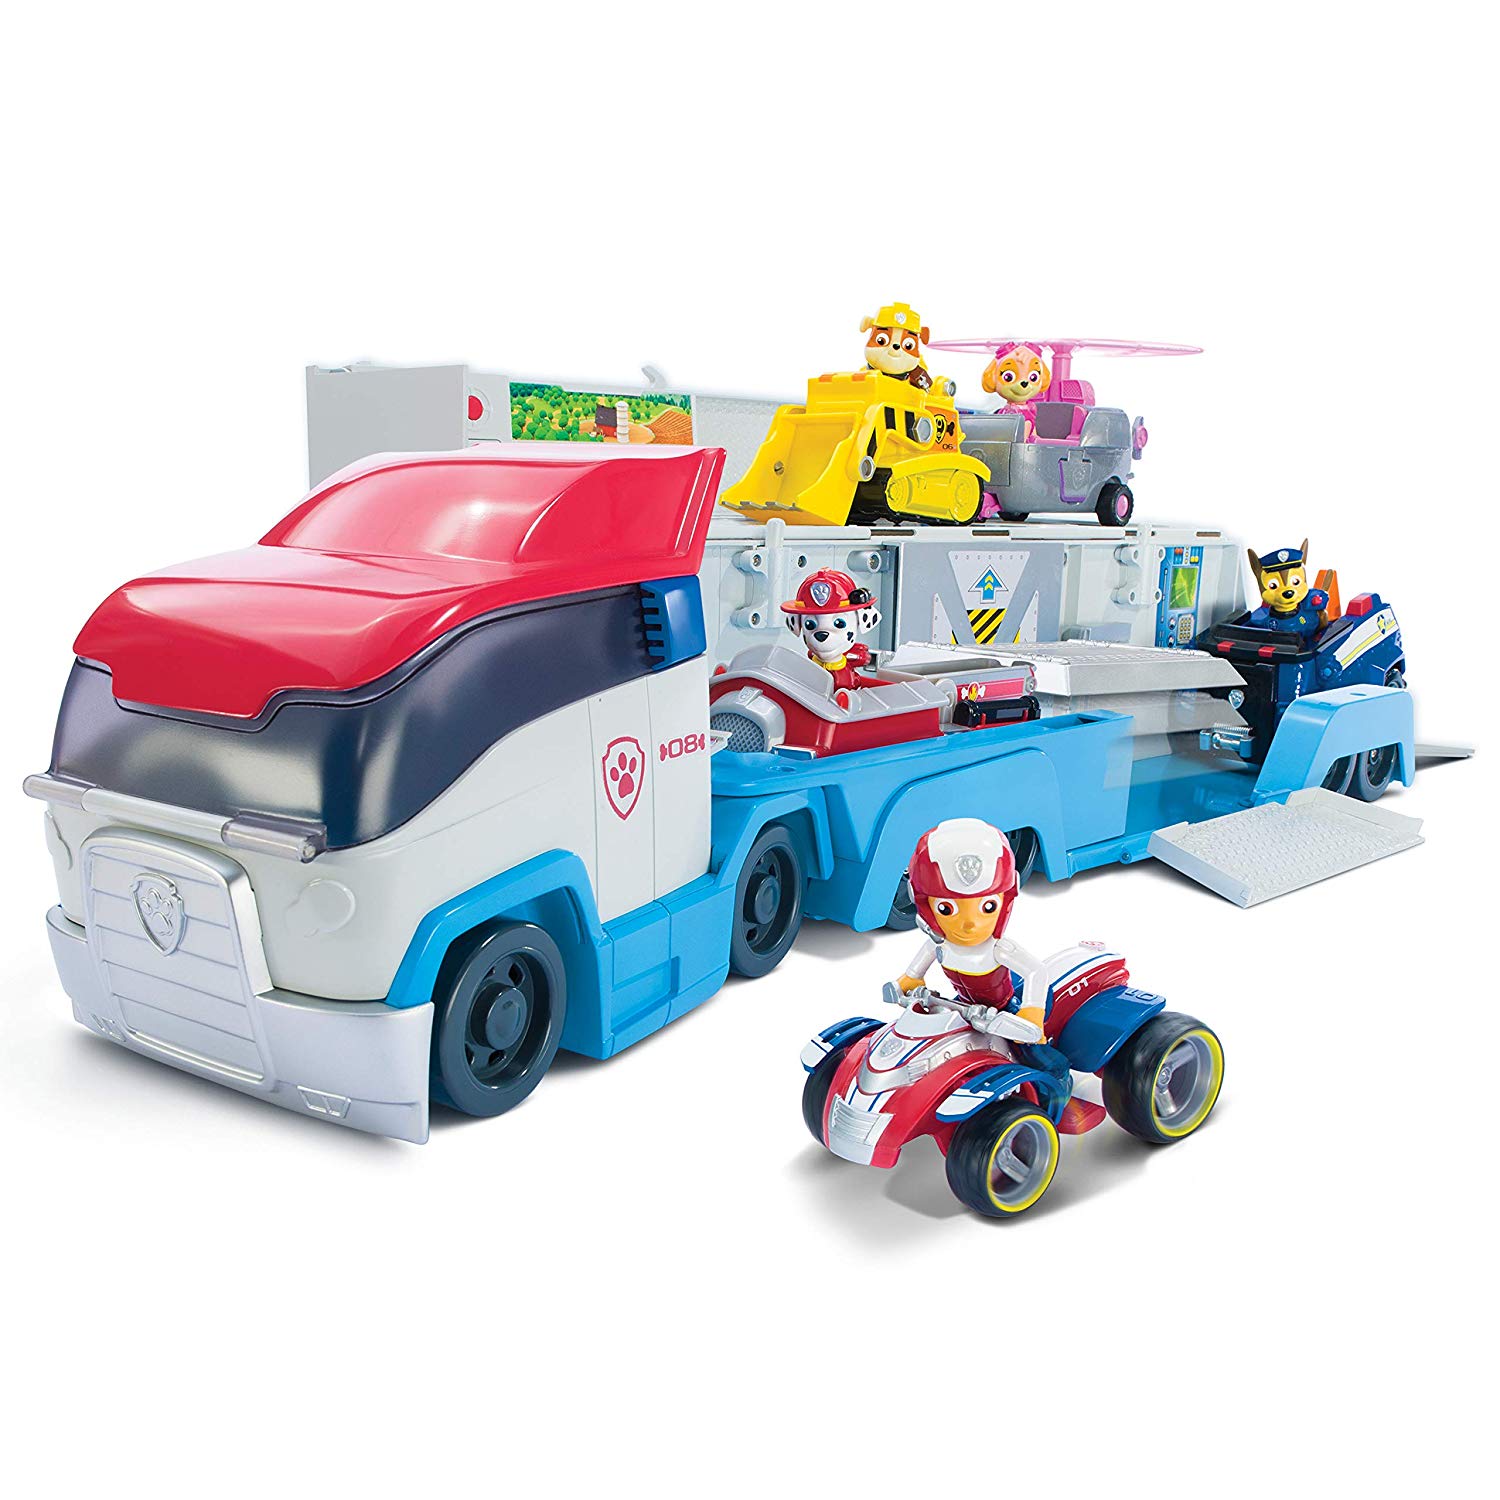 the paw patroller toy